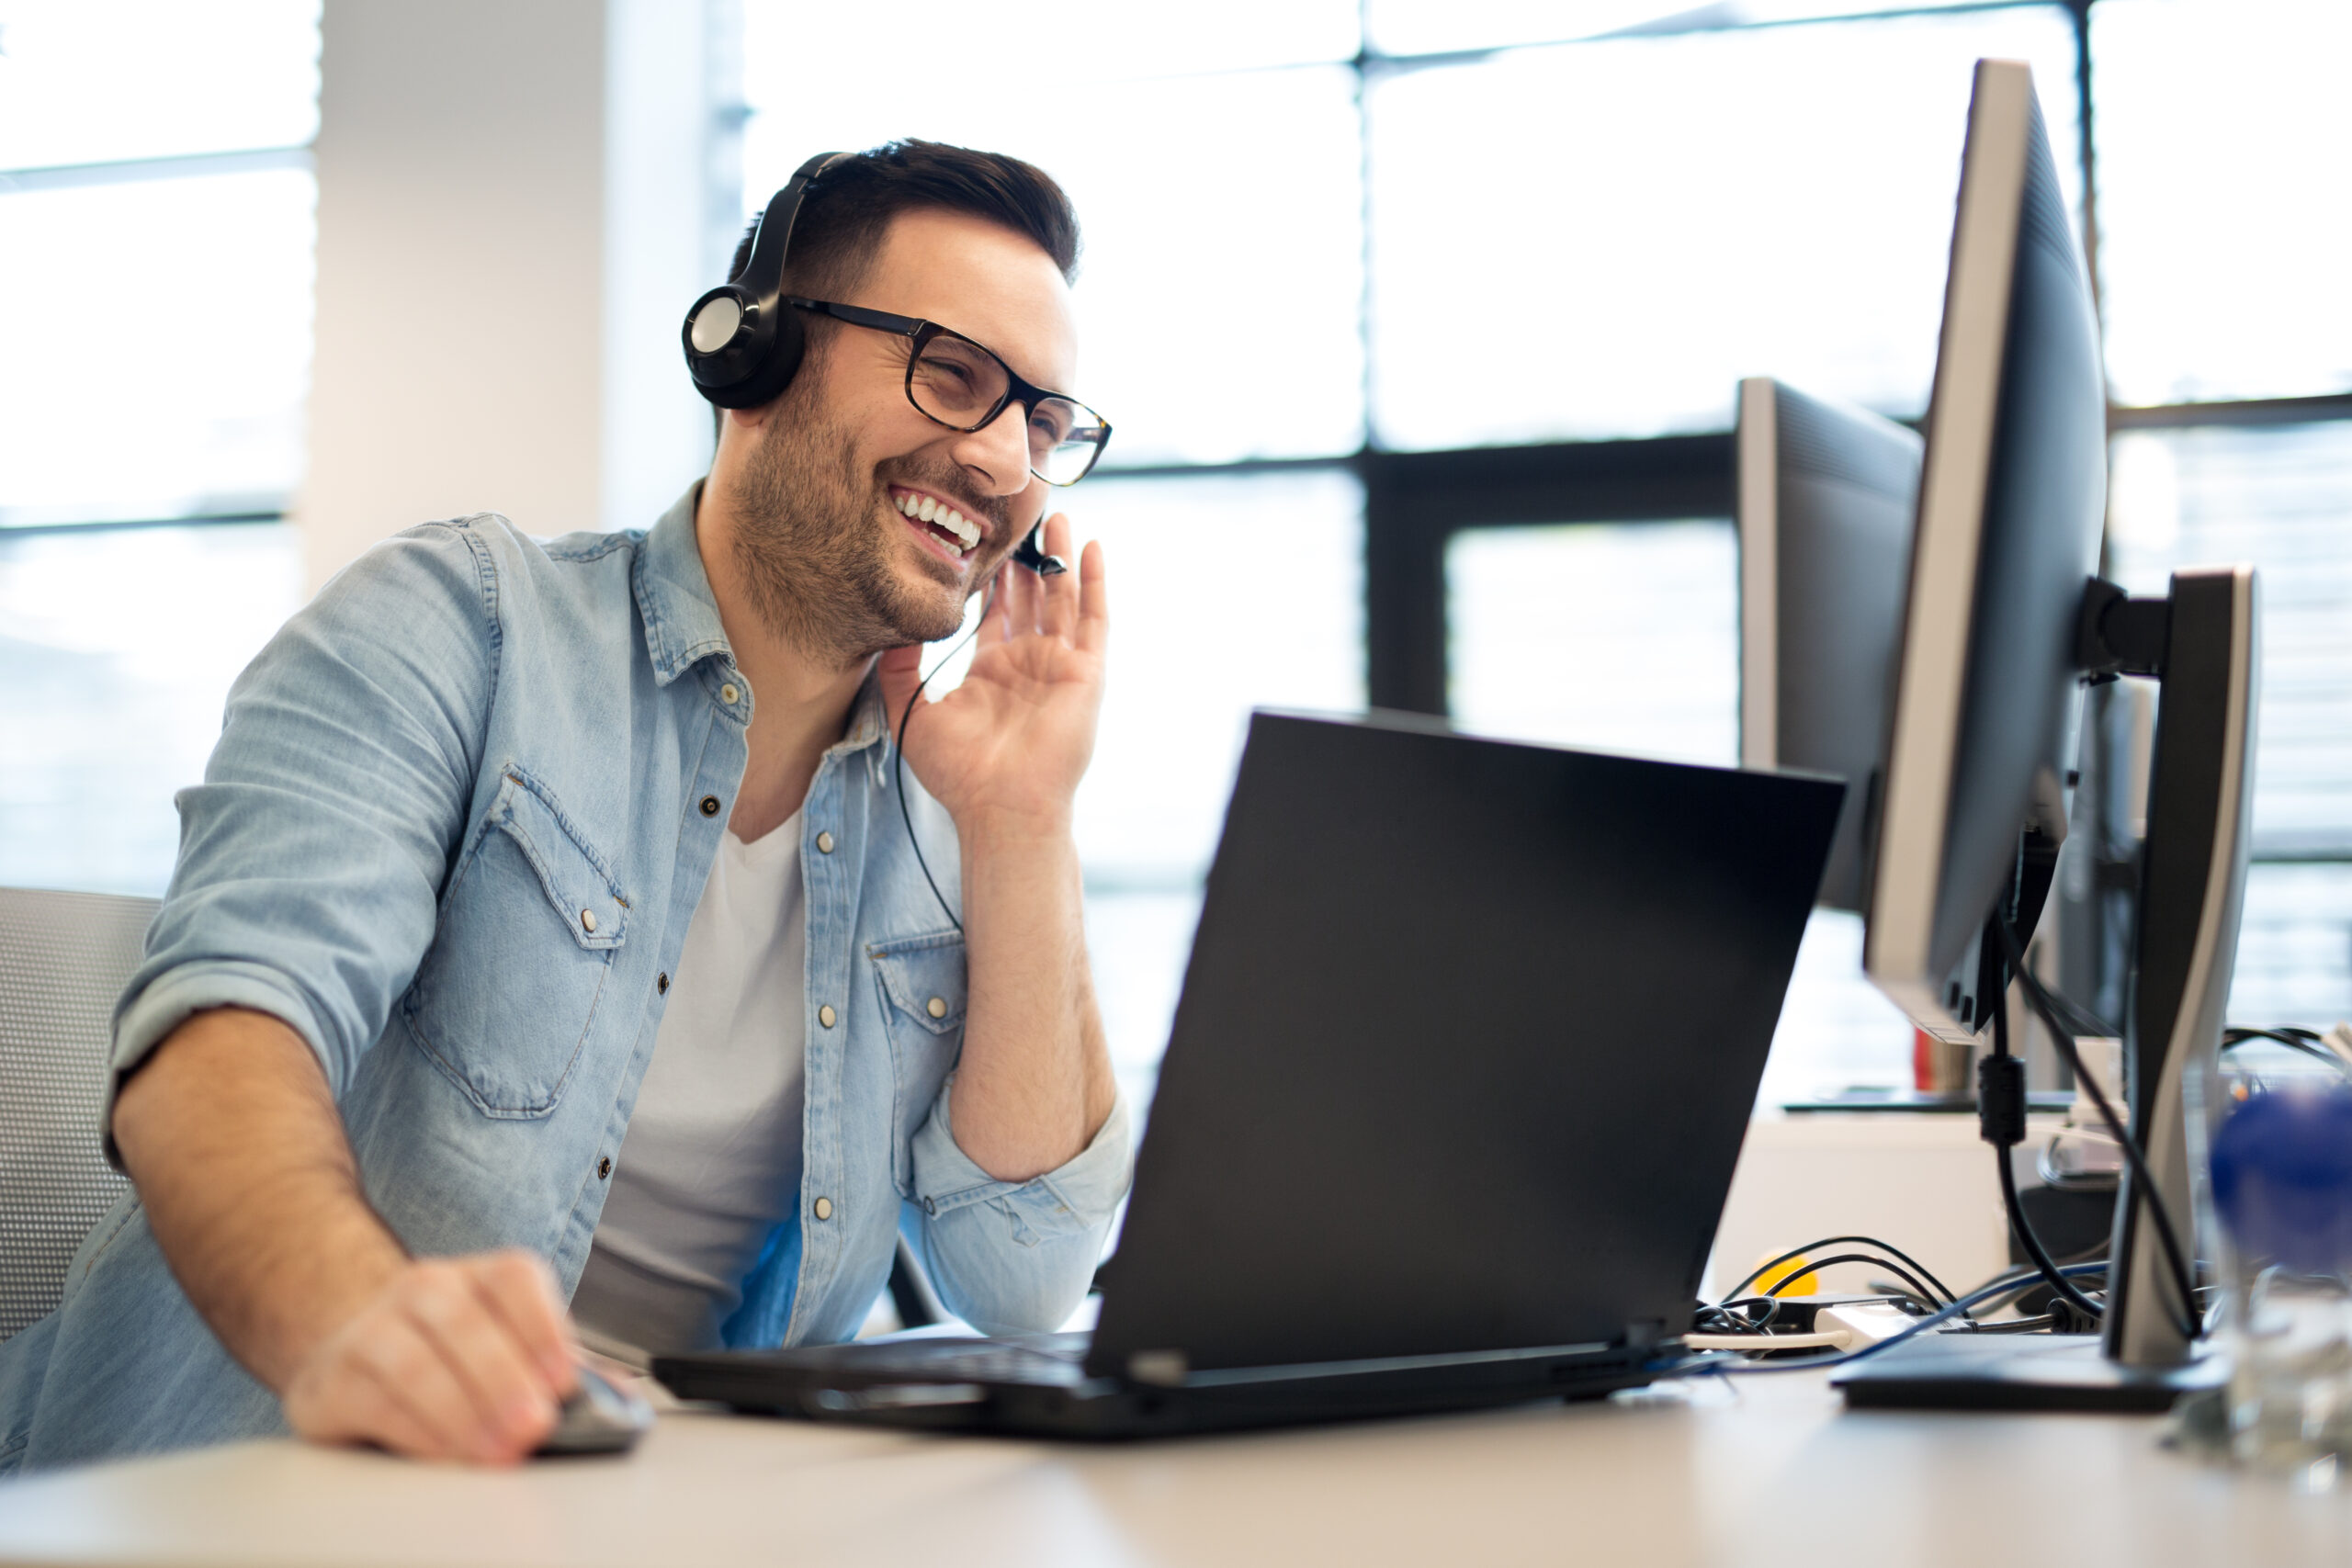 Man smiling sitting in front of computer talking on headset.